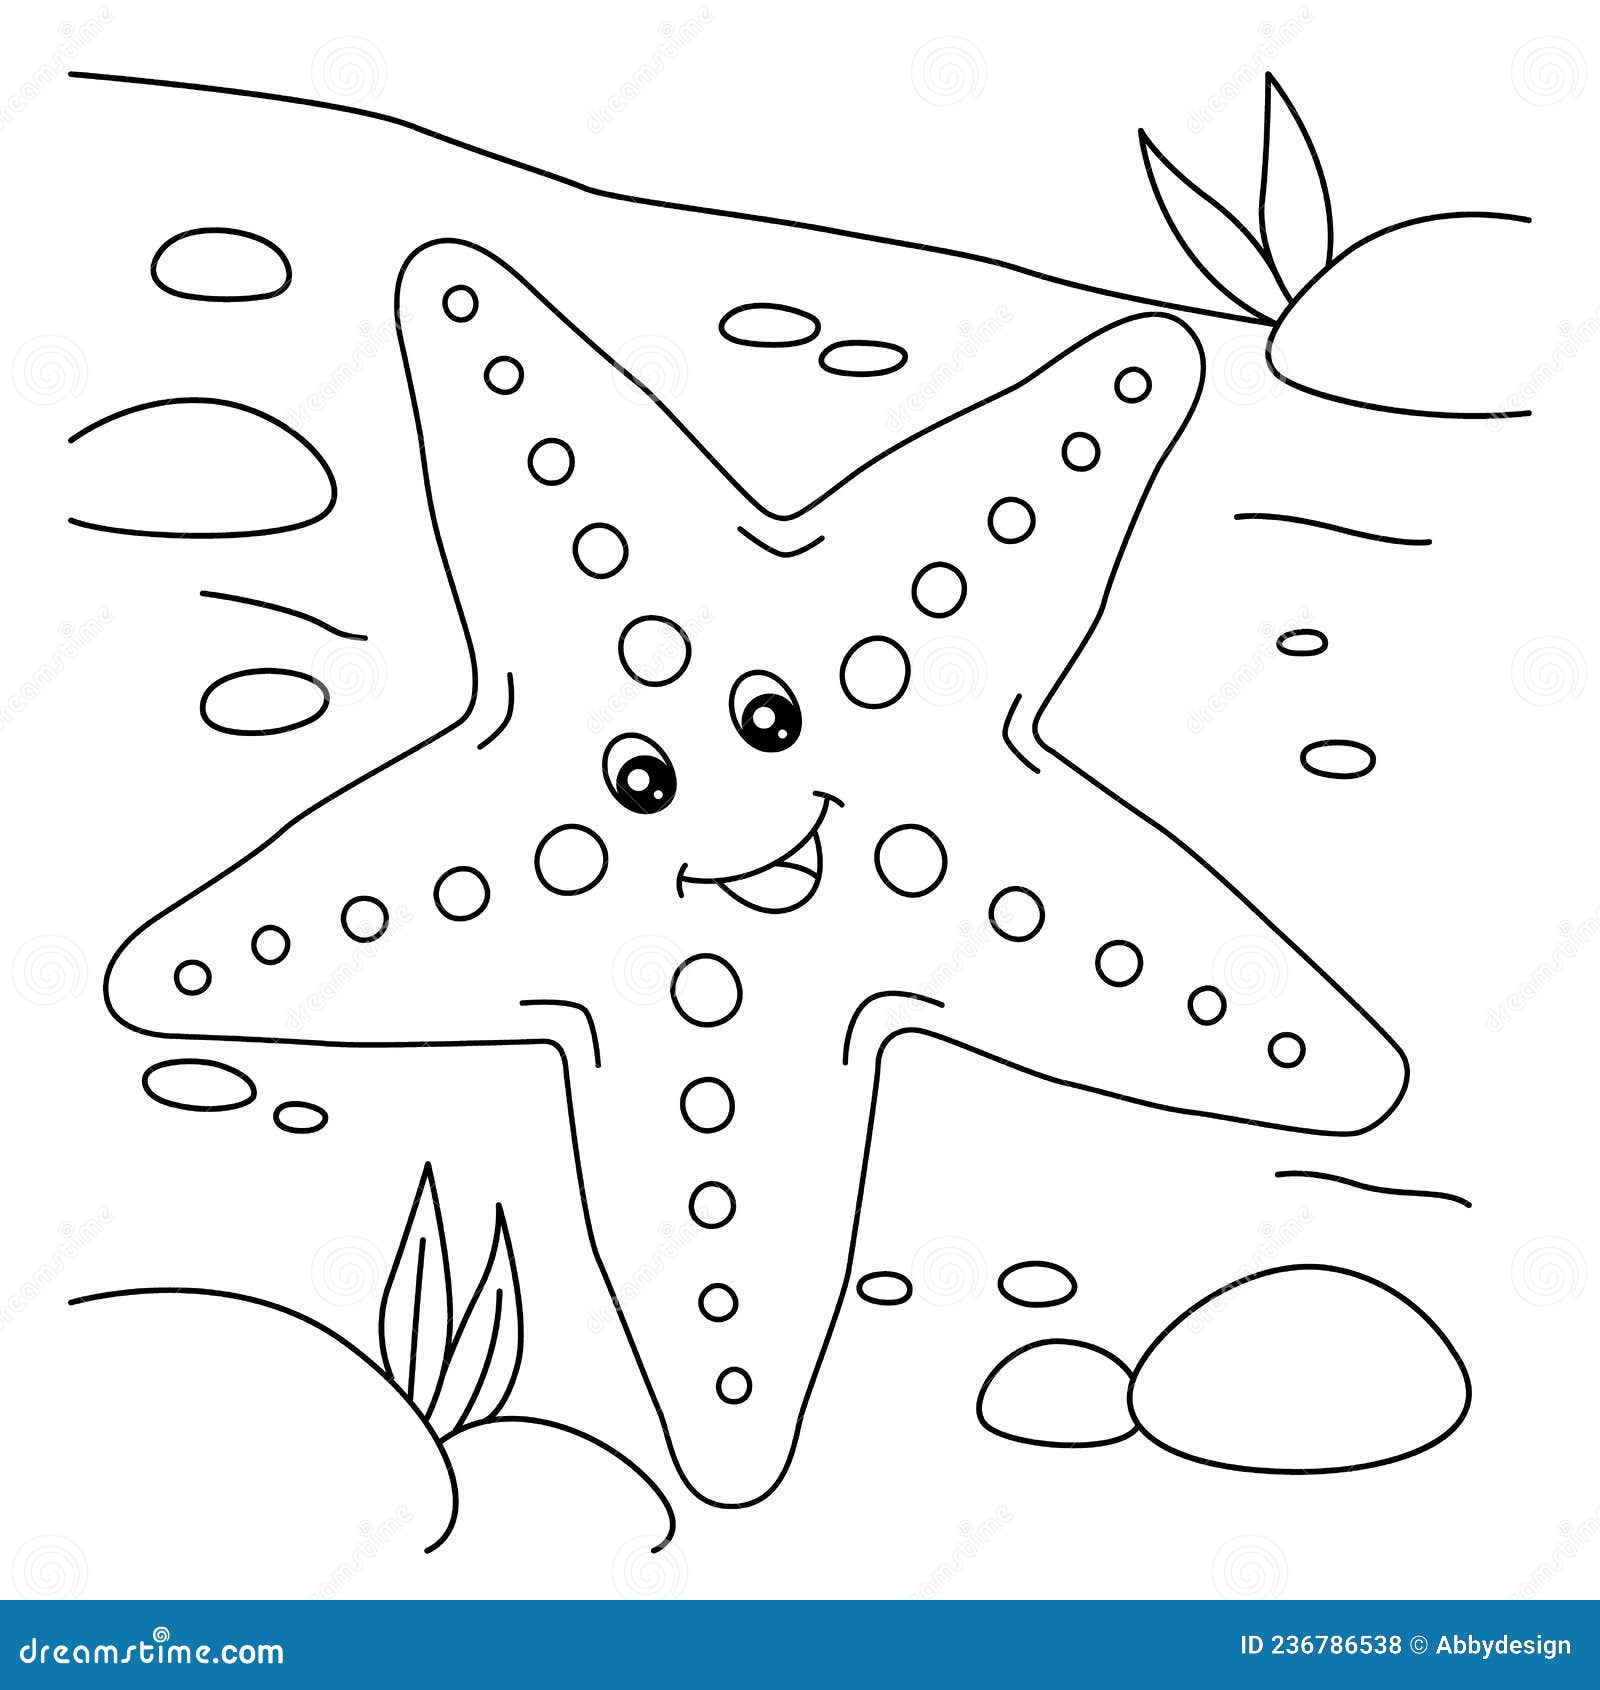 Sea star coloring page for kids stock vector